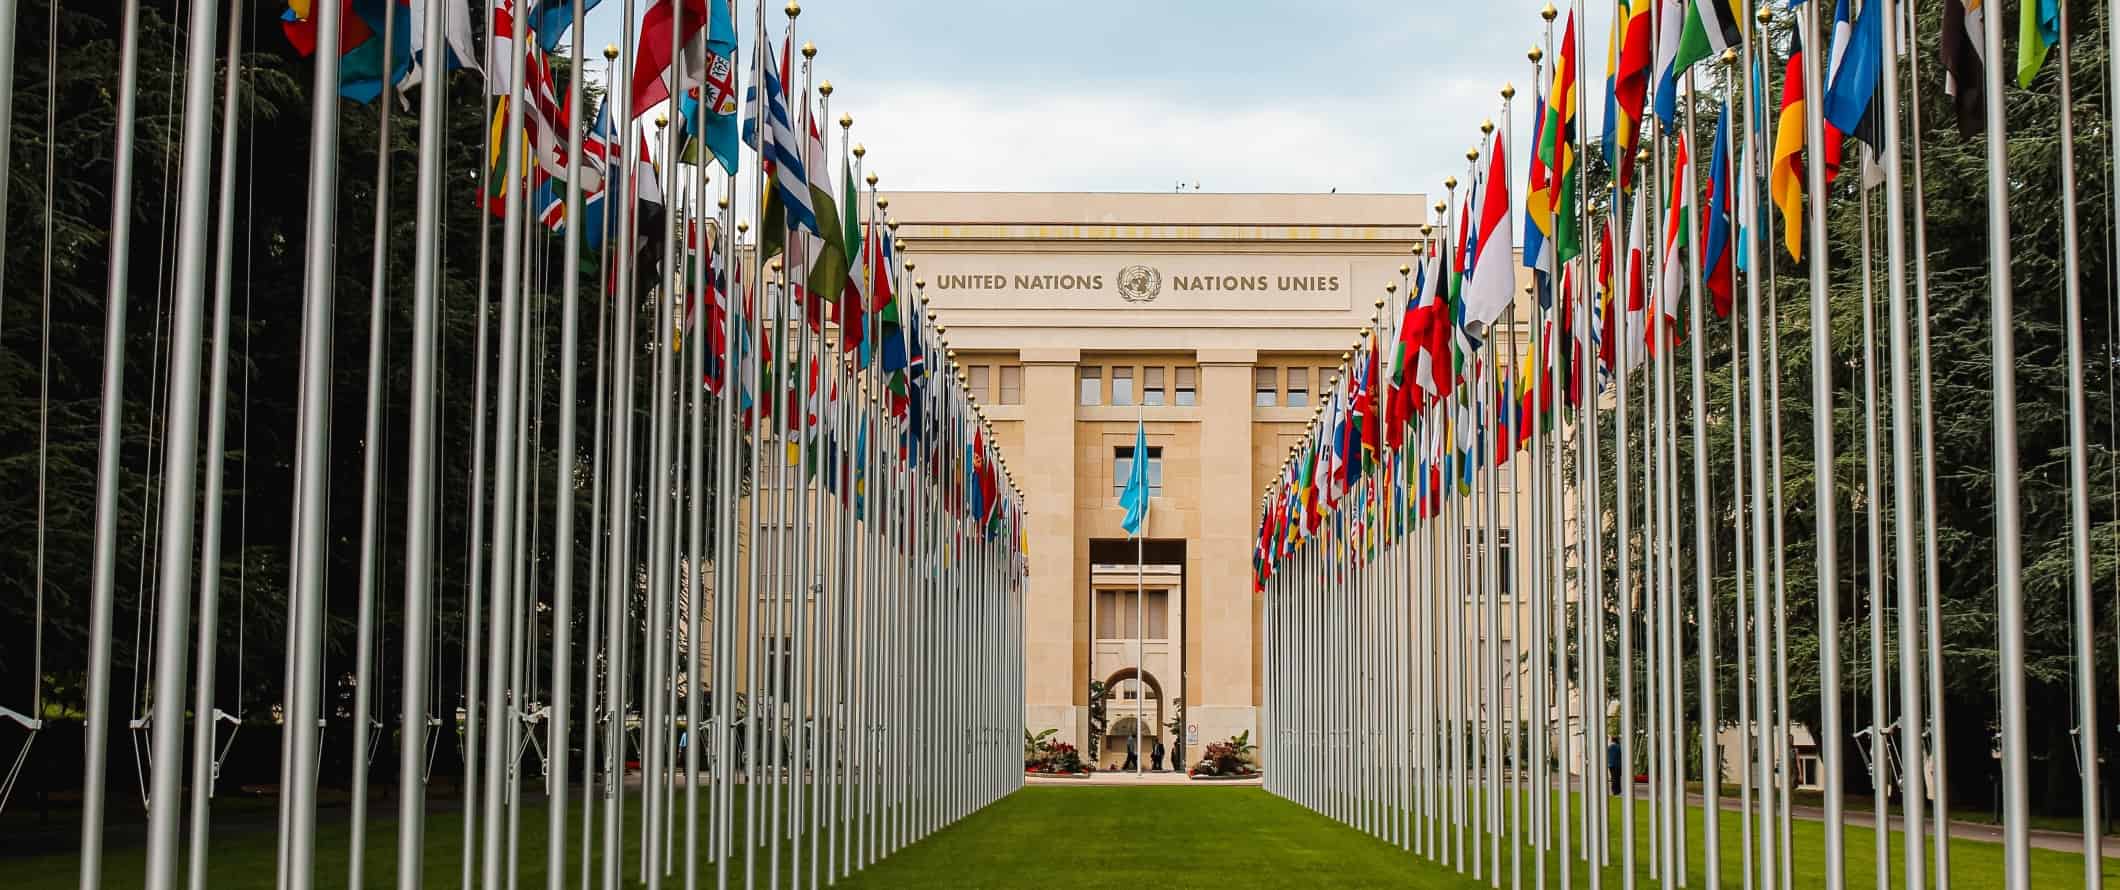 United Nations building with two rows of flags from around the world in front, in Geneva, Switzerland